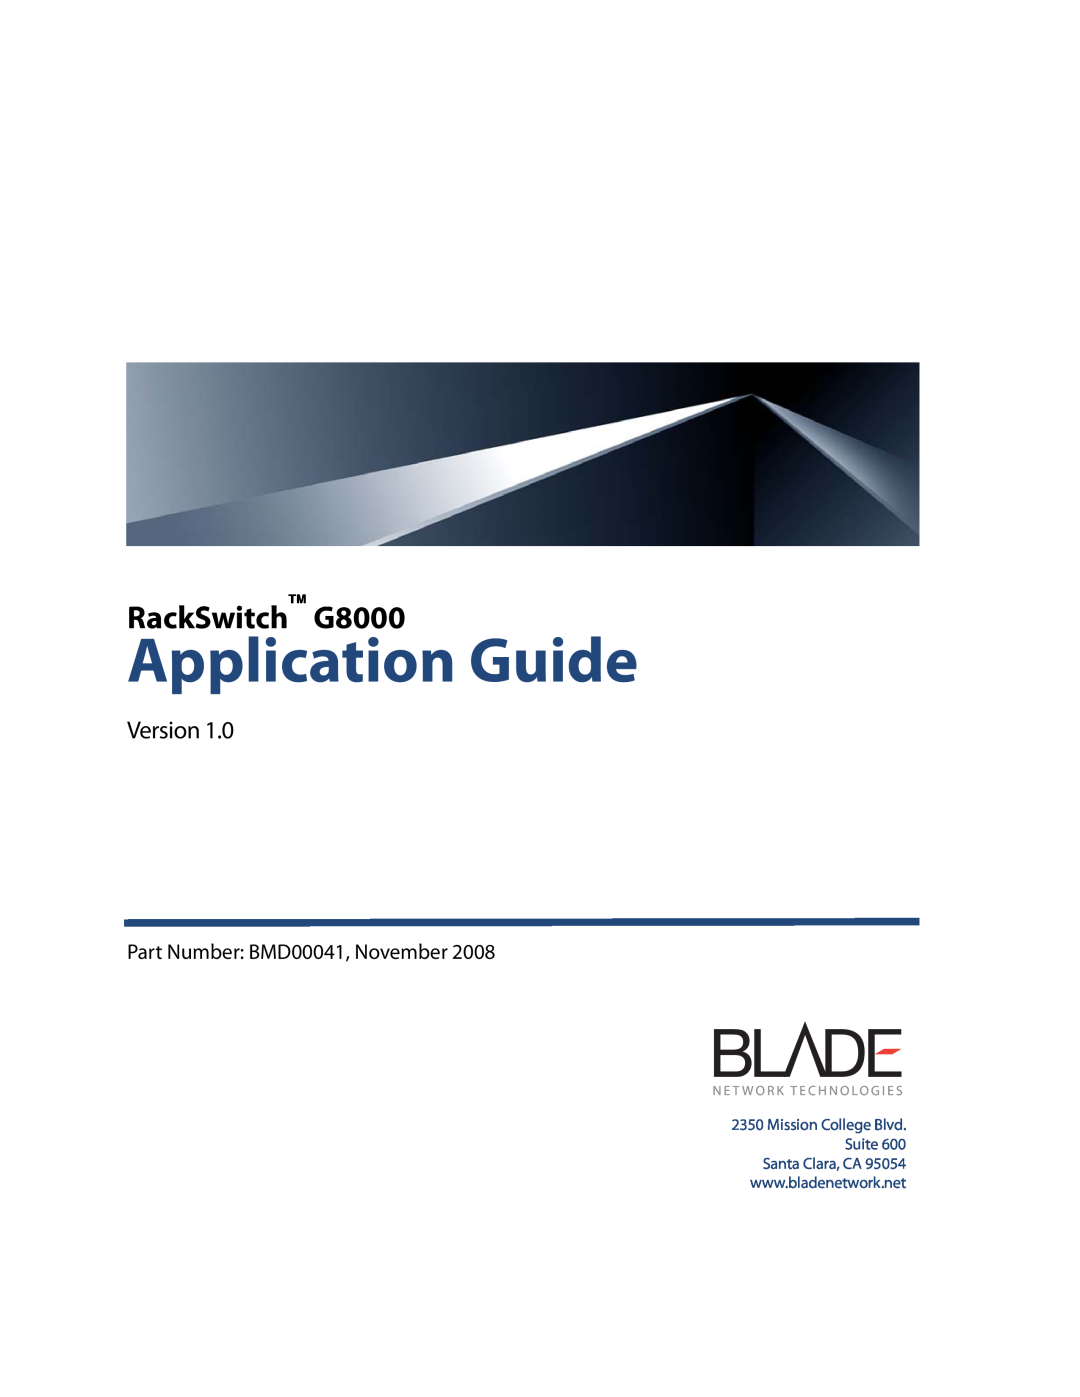 Blade ICE manual Application Guide, RackSwitch G8000, Version, Part Number BMD00041, November 